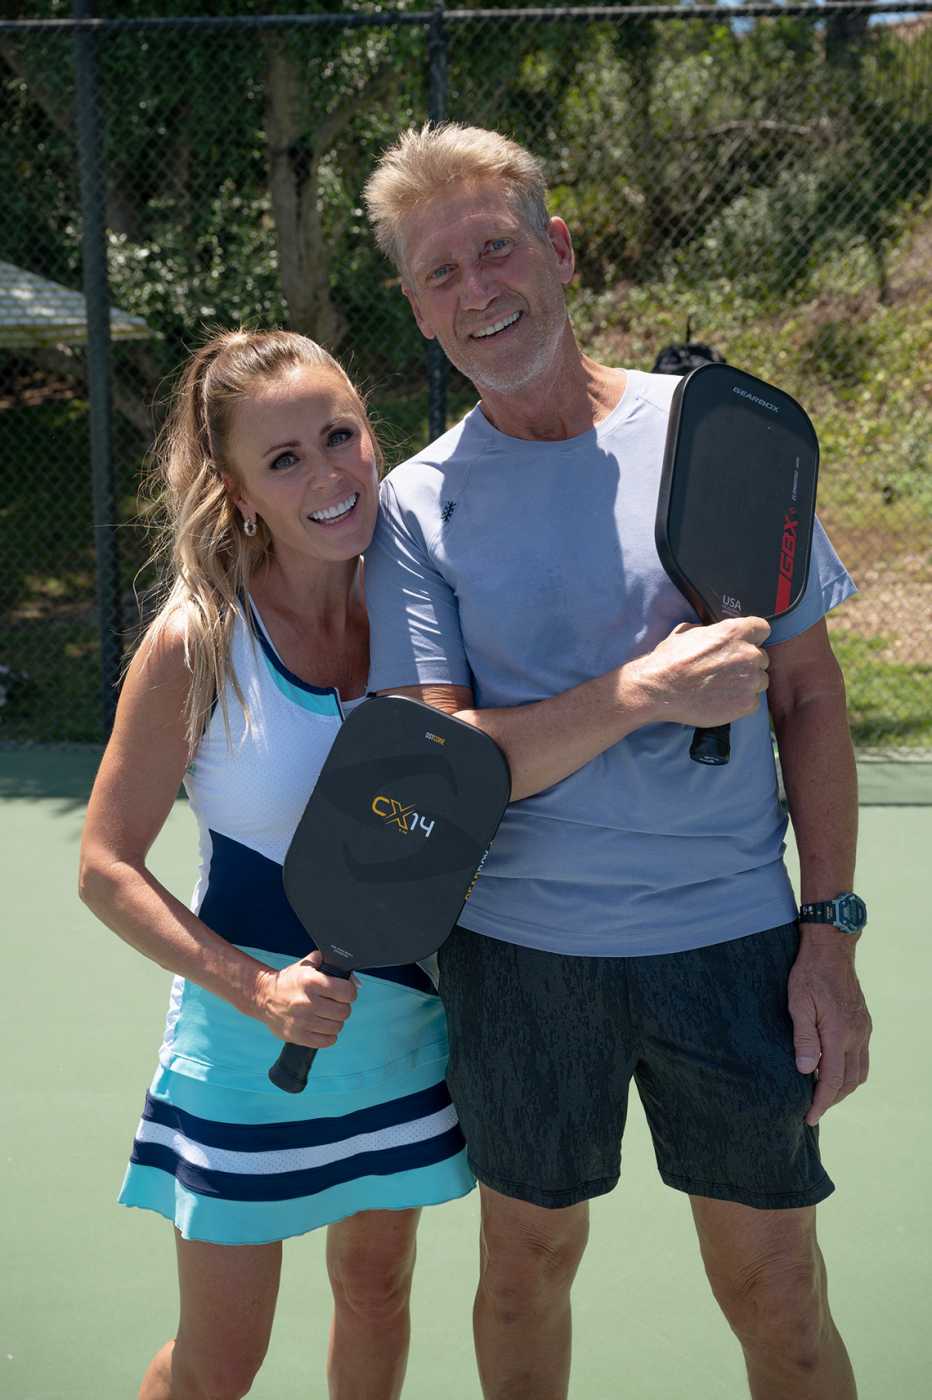 the bachelorette star trista sutter and the golden bachelor gerry turner holding pickleball rackets